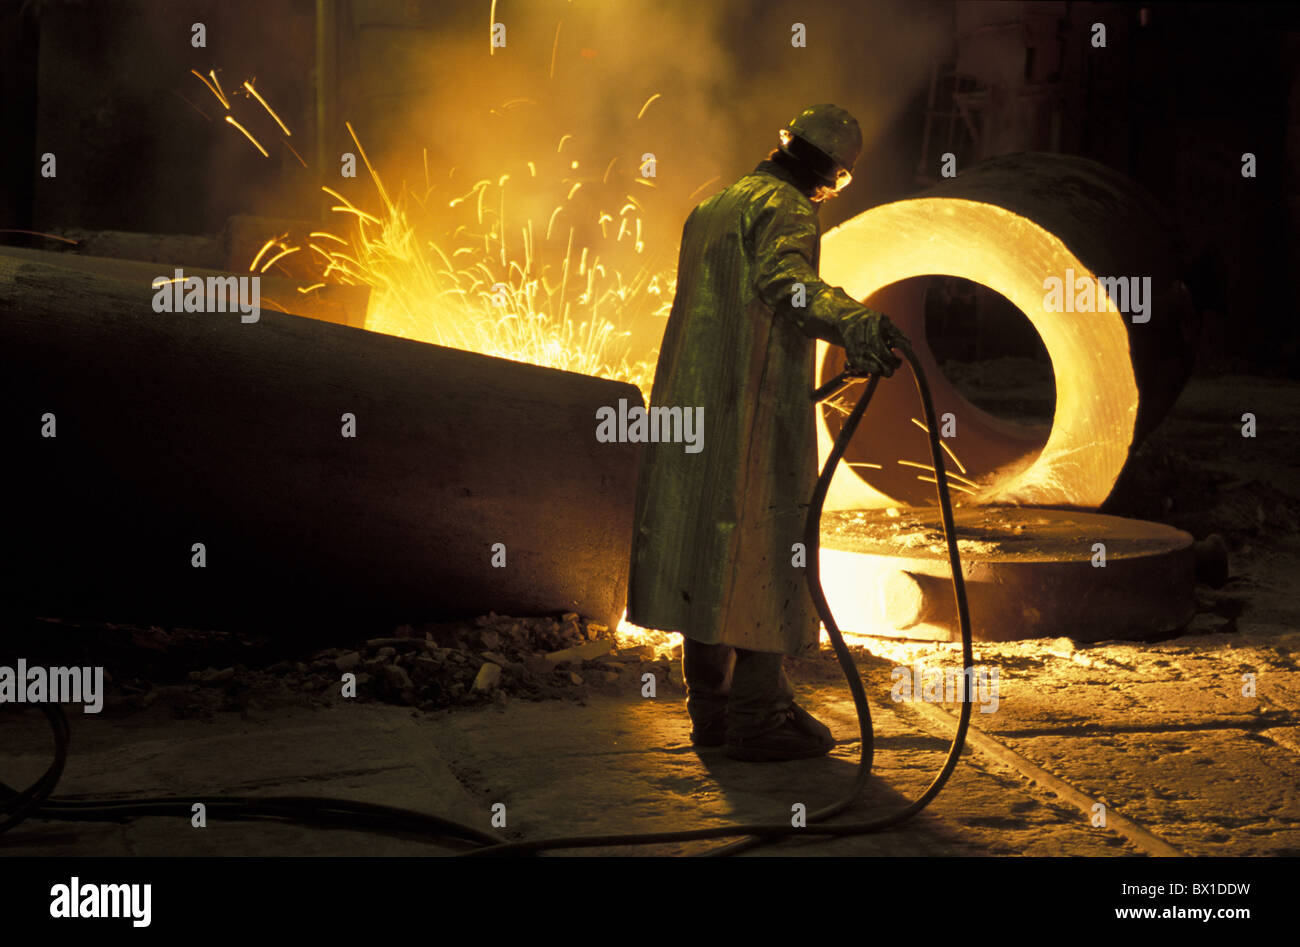 A.Fink Sons Company Chicago Illinois Steel Mill USA America United States industry workers steel steel in Stock Photo